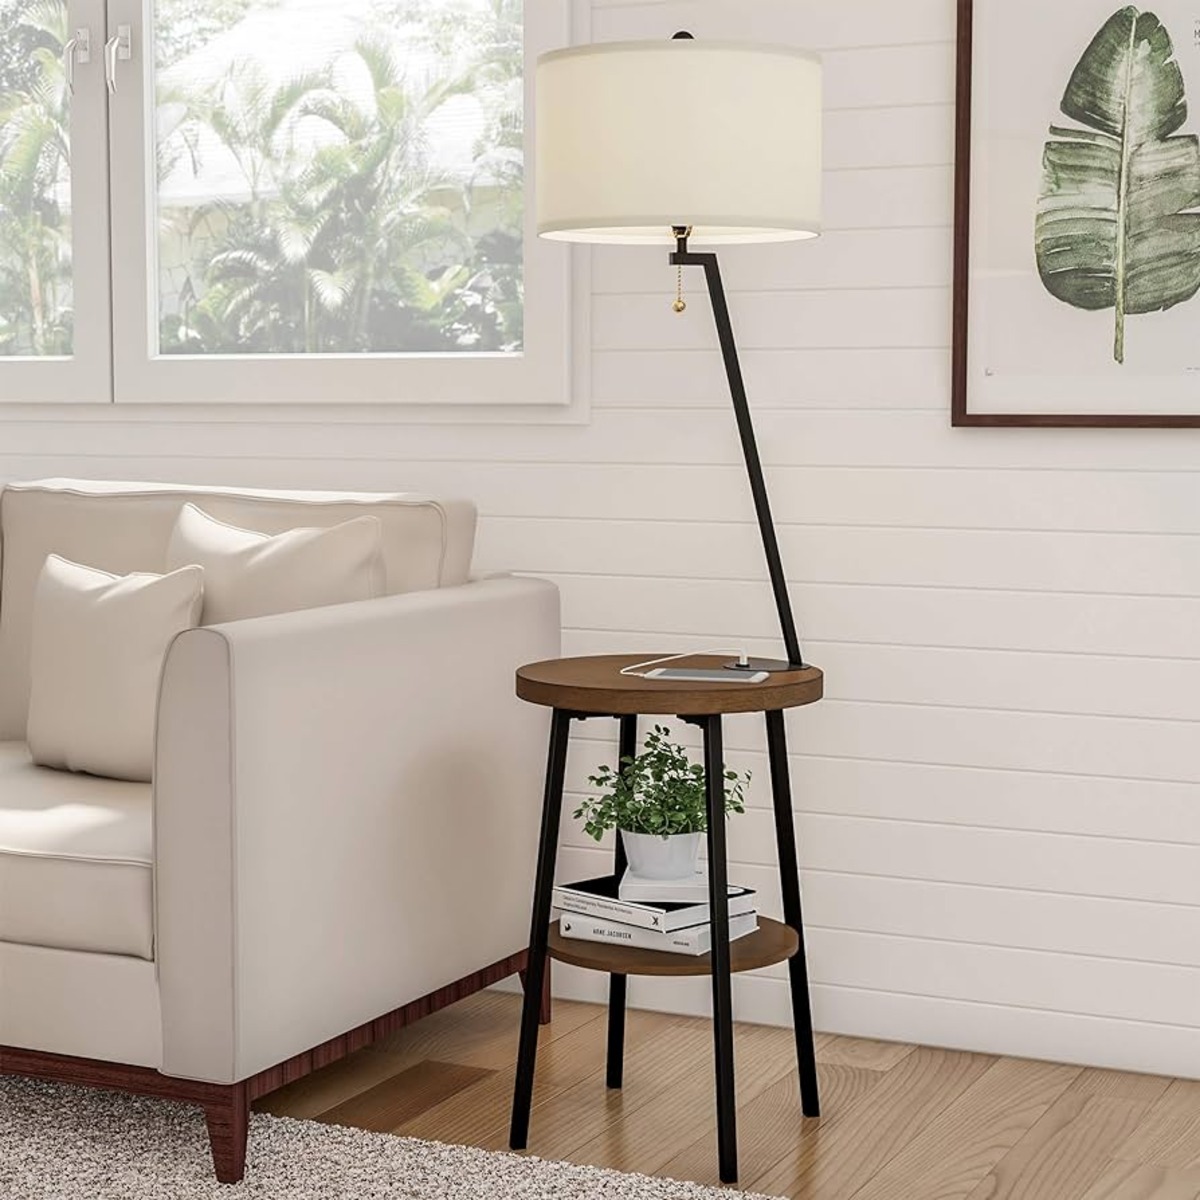 13 Incredible Floor Lamp With Table for 2023